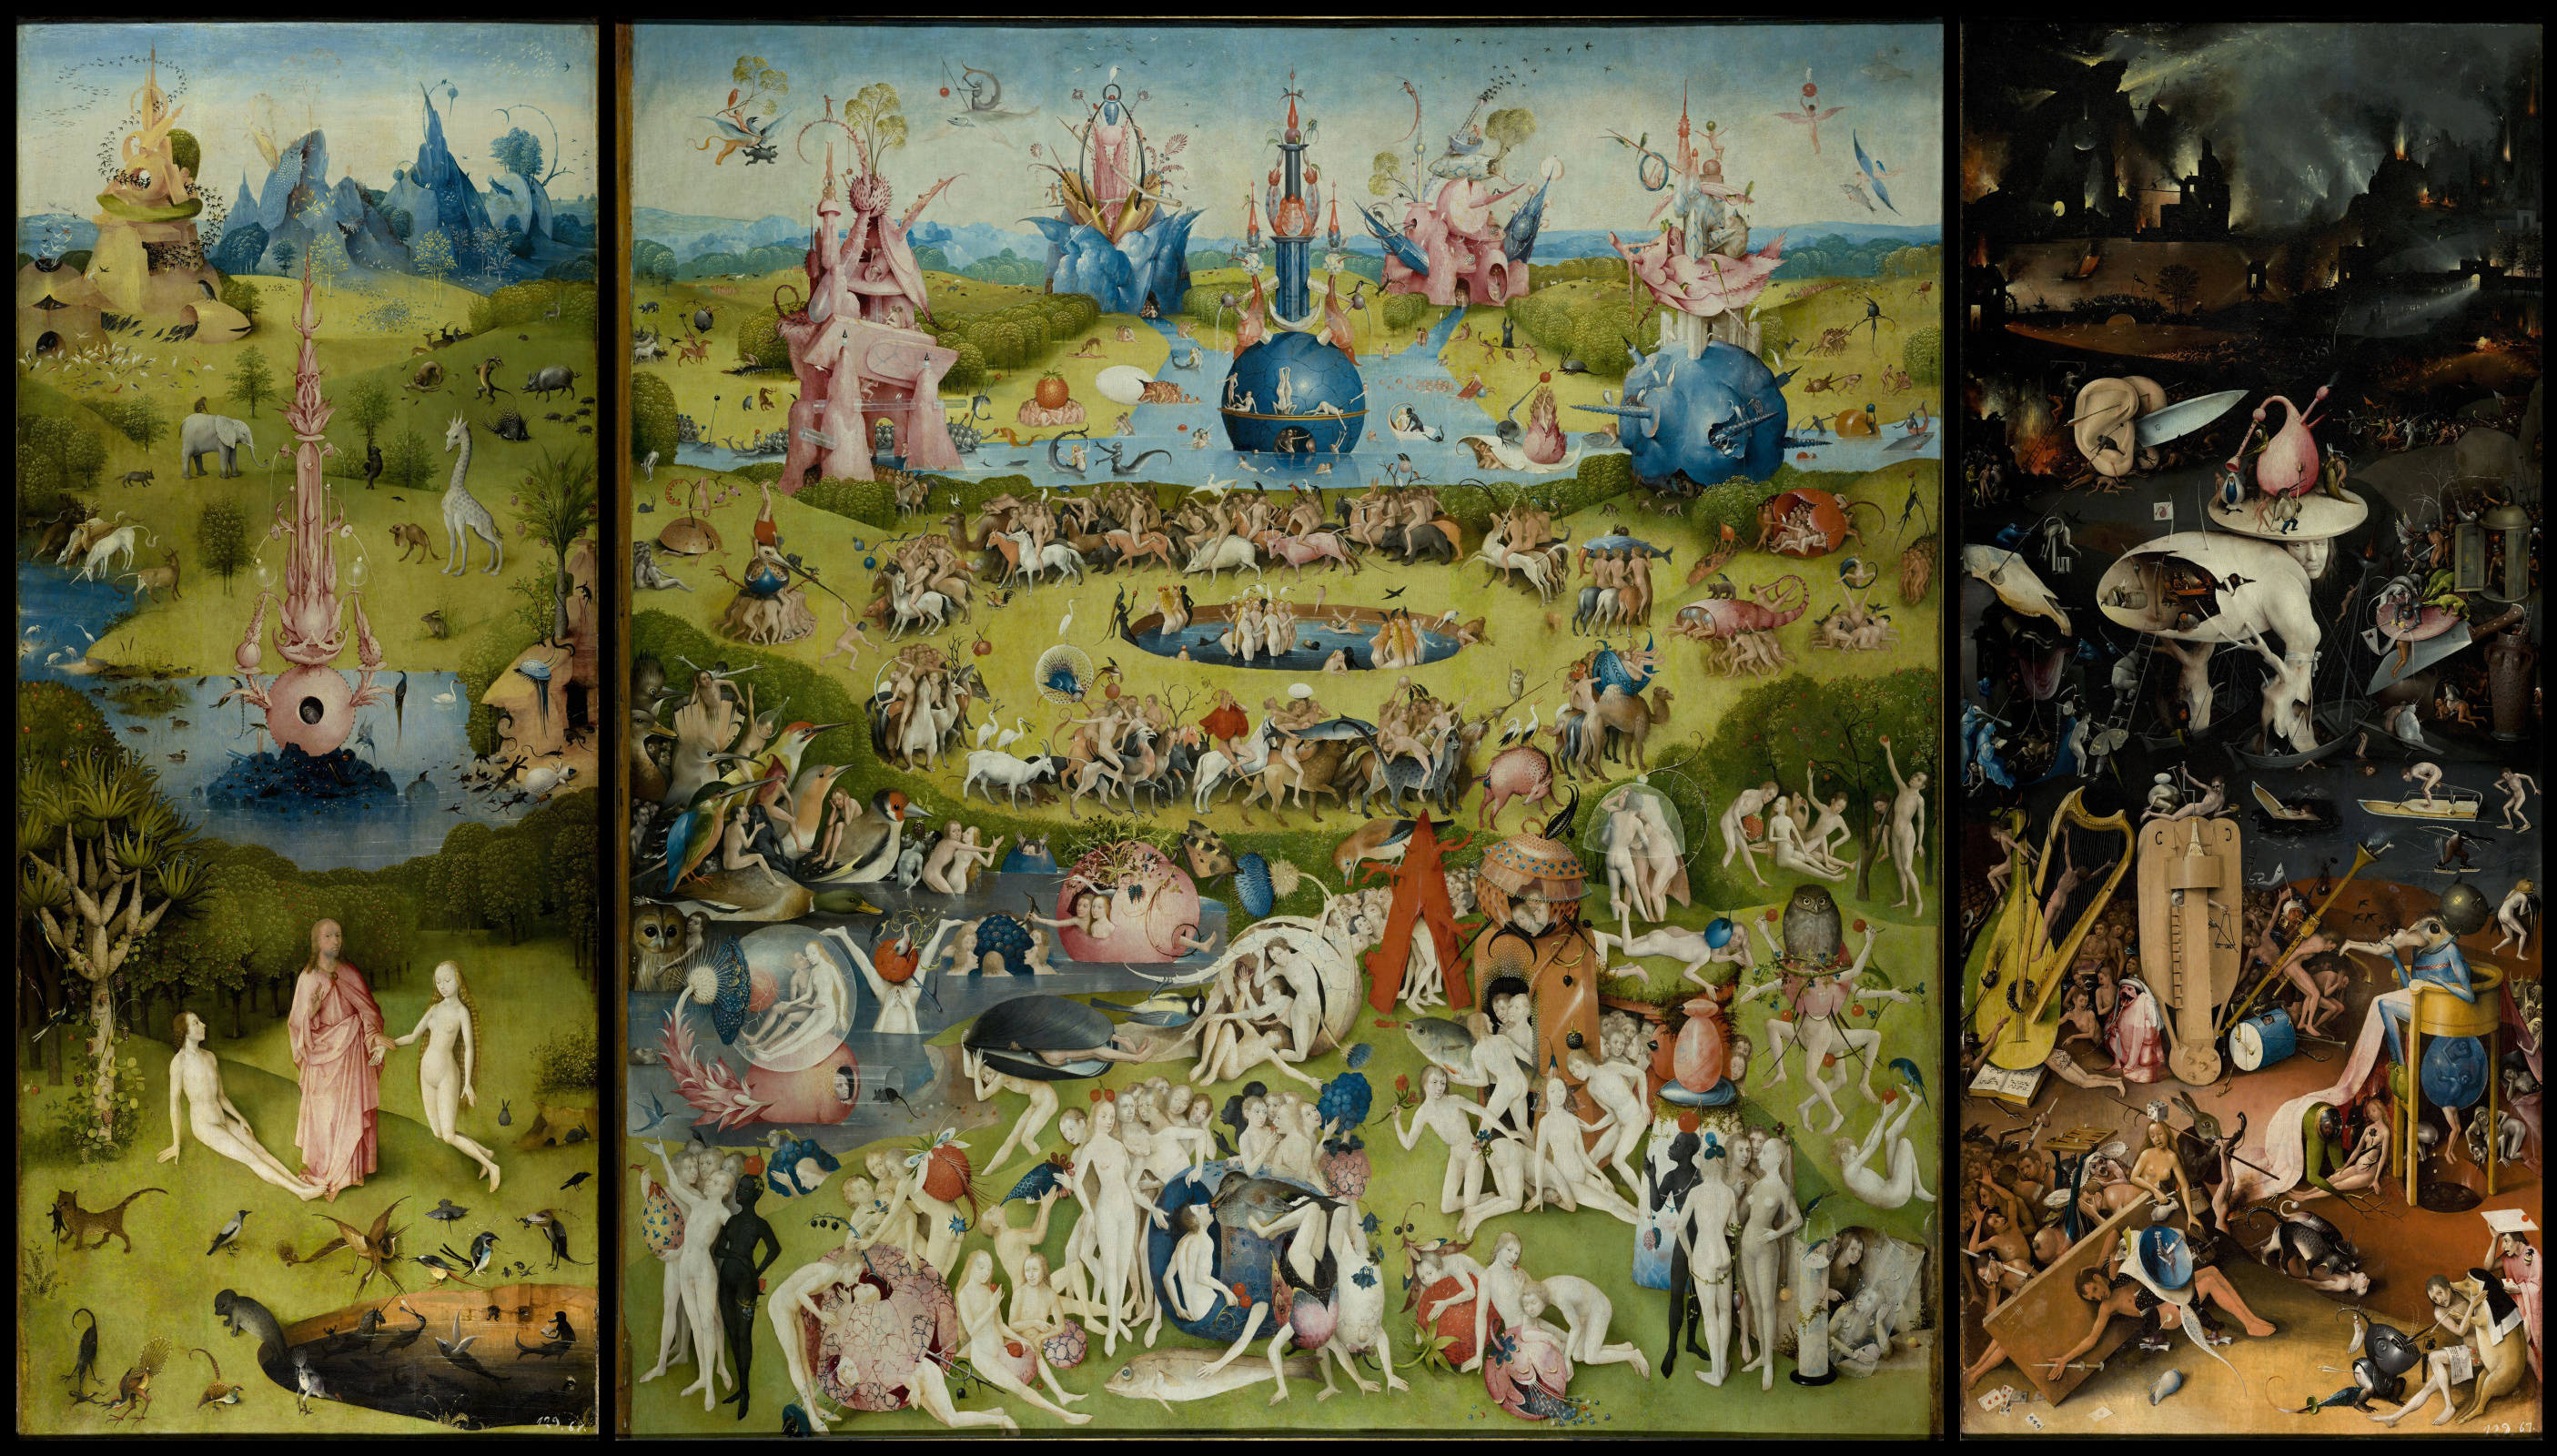 Hieronymus Bosch. The garden of earthly delights